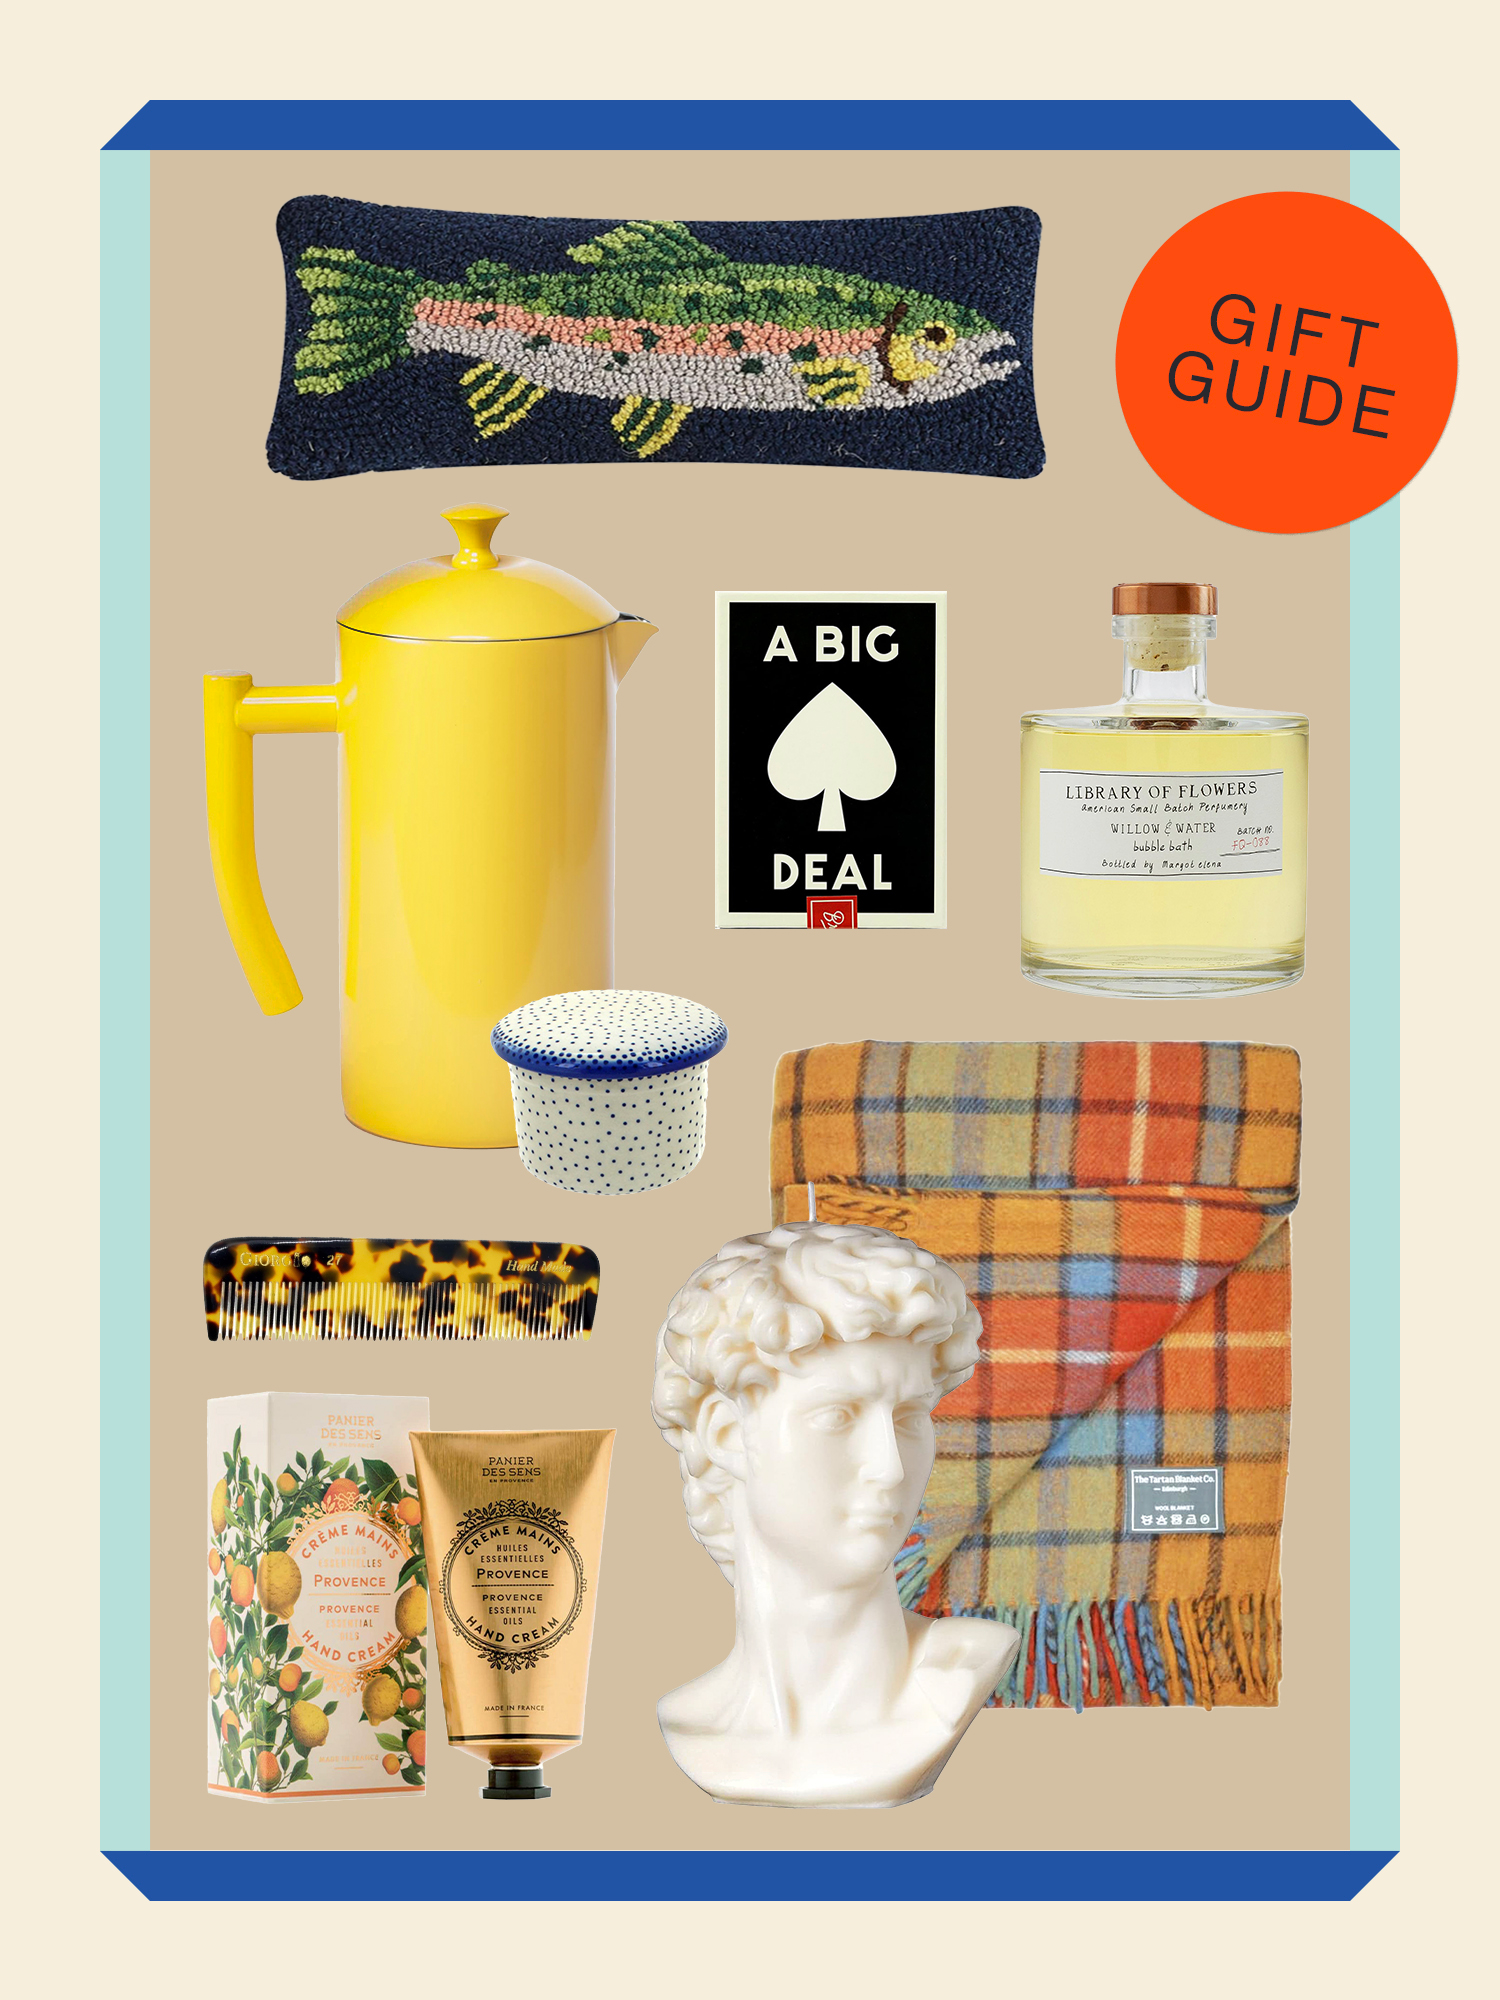 The Best Unique Amazon Gifts product collage on a designed background.